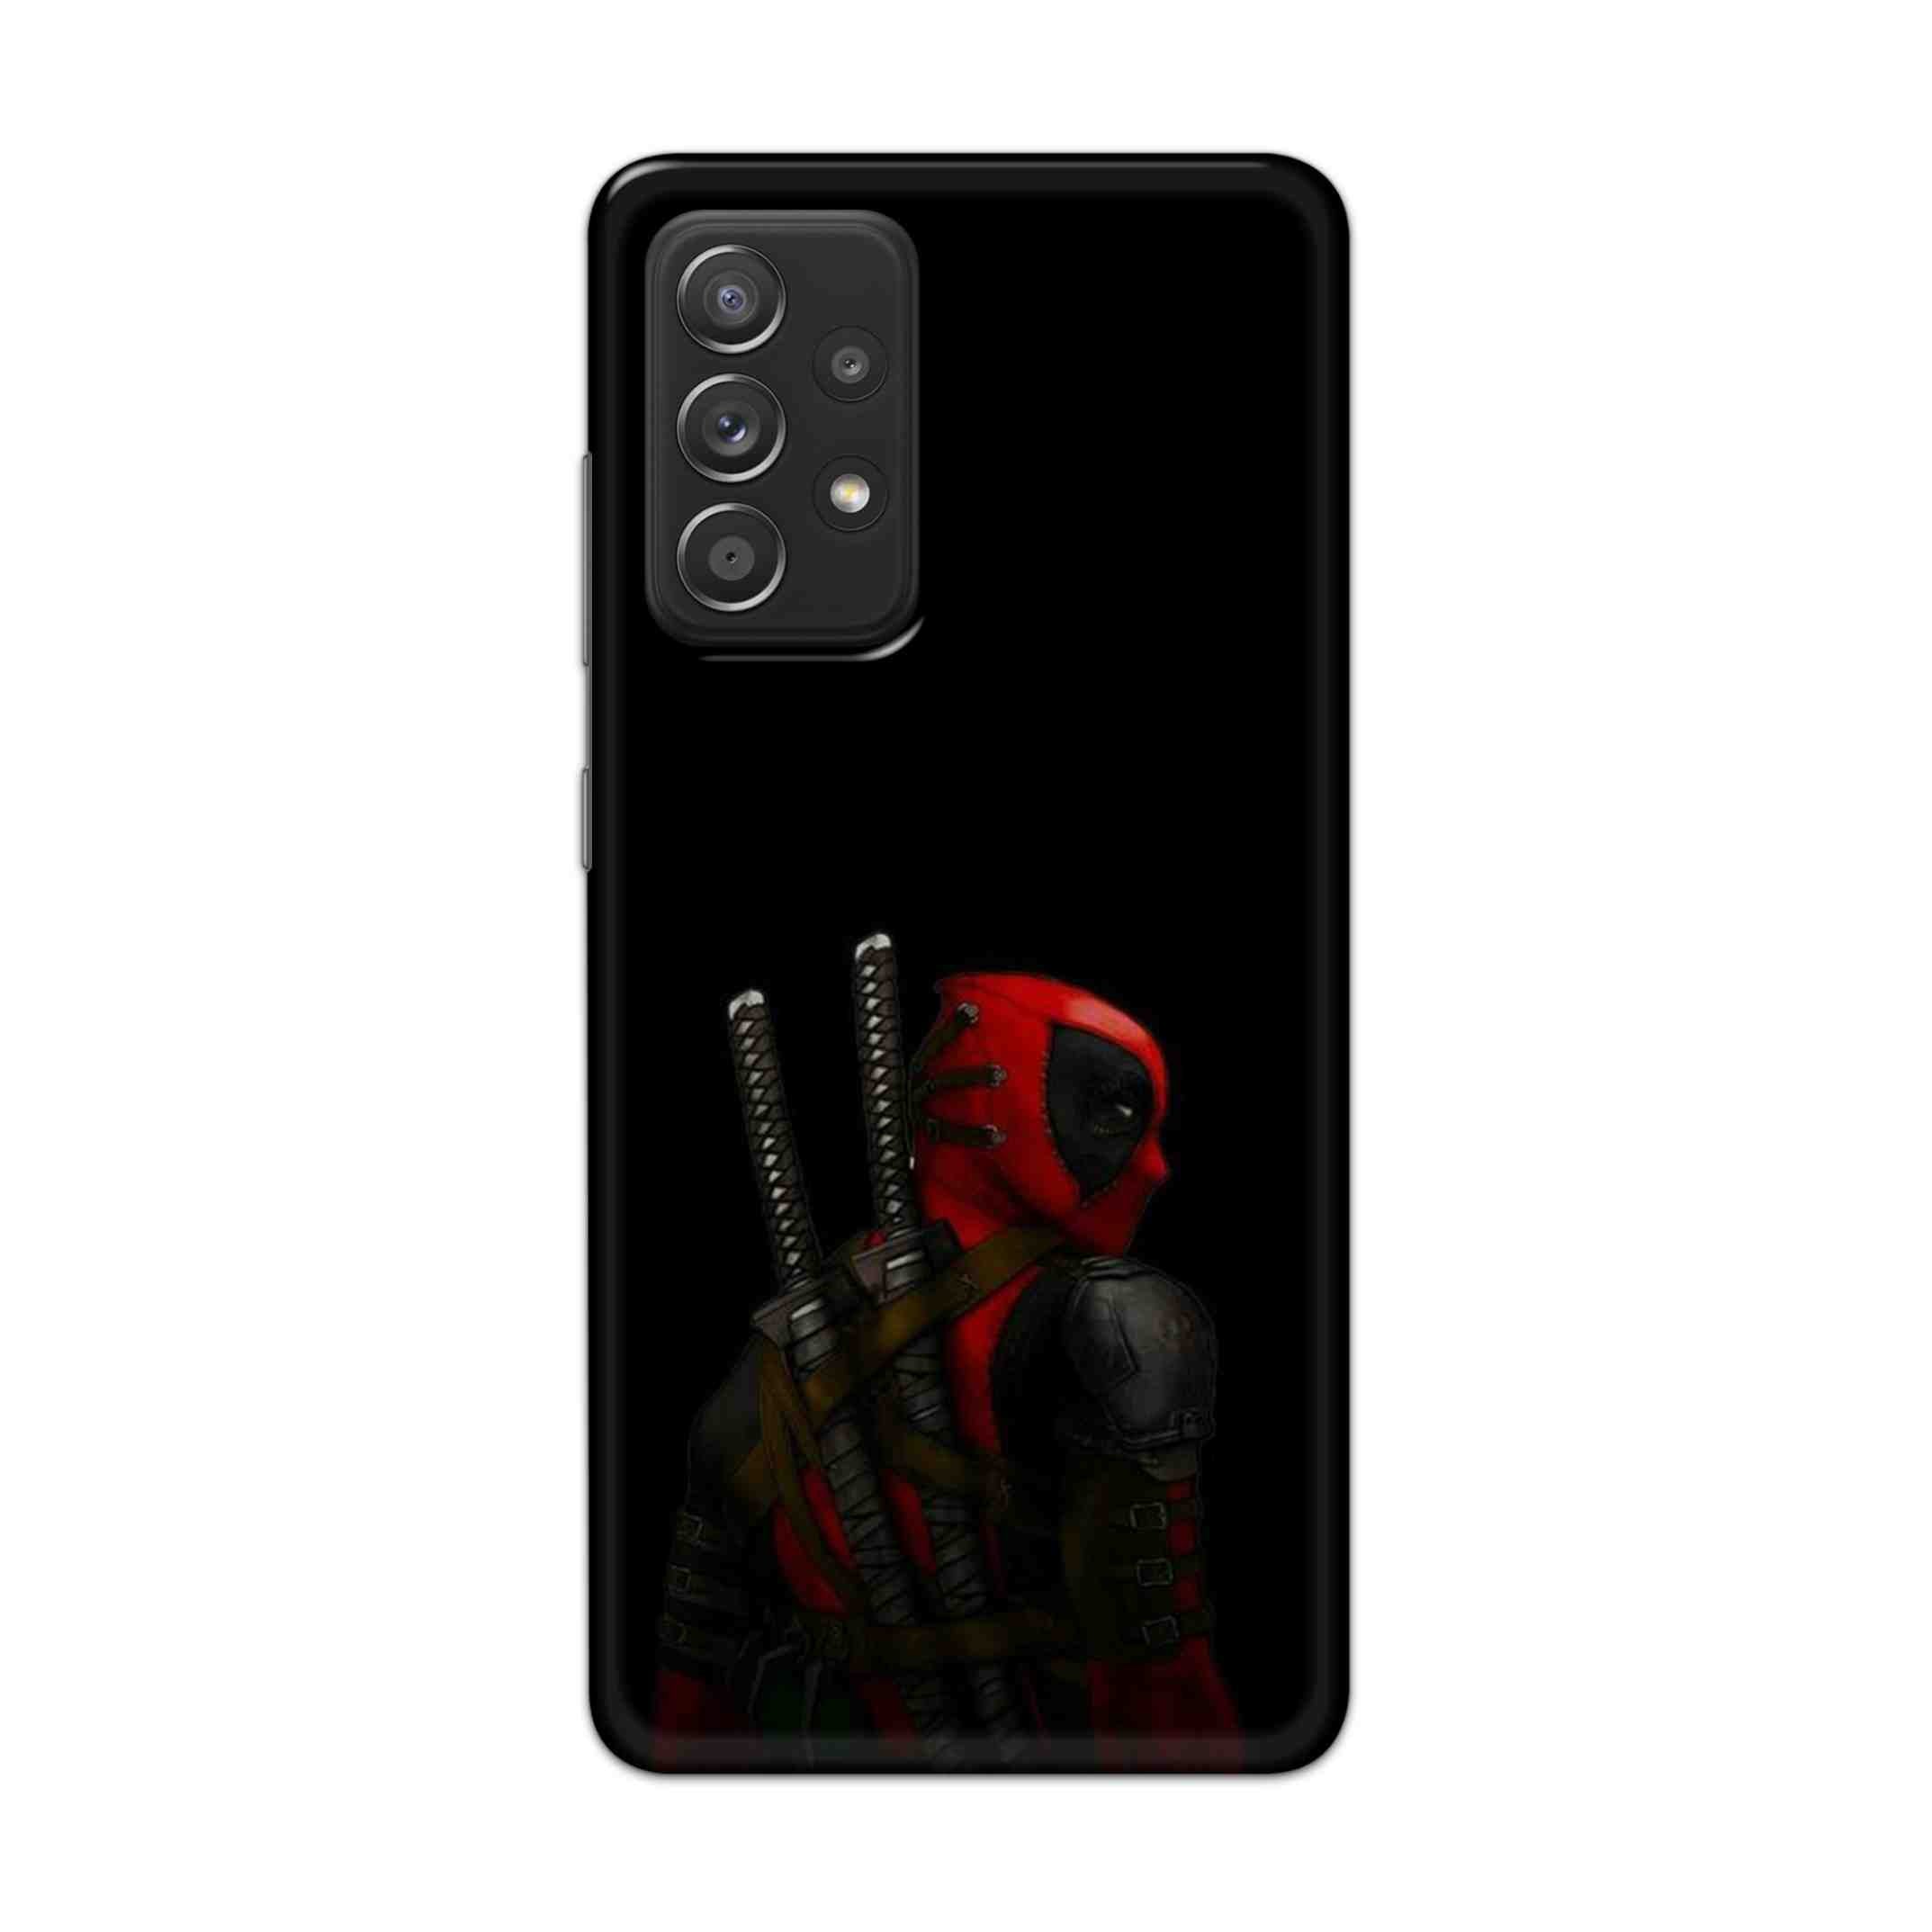 Buy Deadpool Hard Back Mobile Phone Case Cover For Samsung Galaxy A52 Online